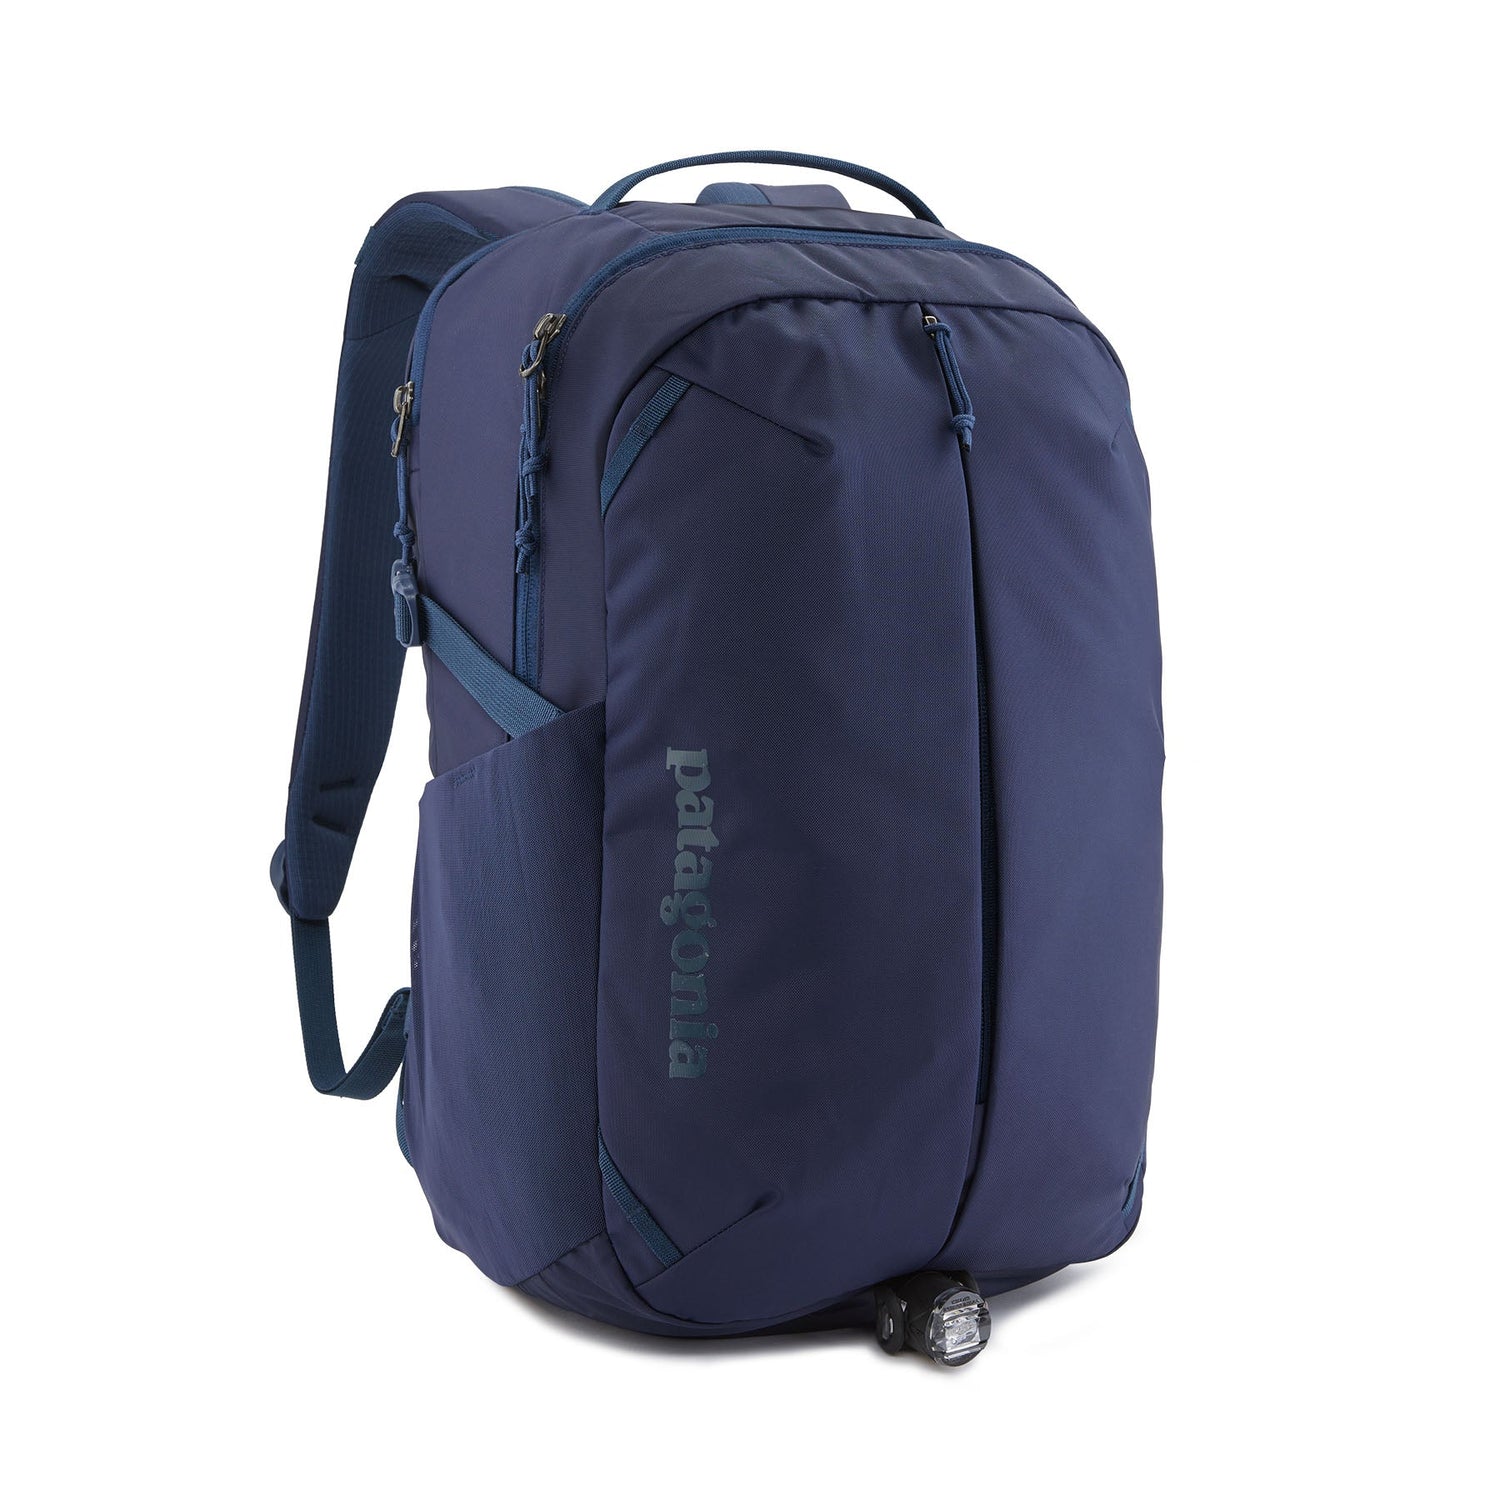 Patagonia Refugio Day Pack 26L - Recycled Polyester Bags